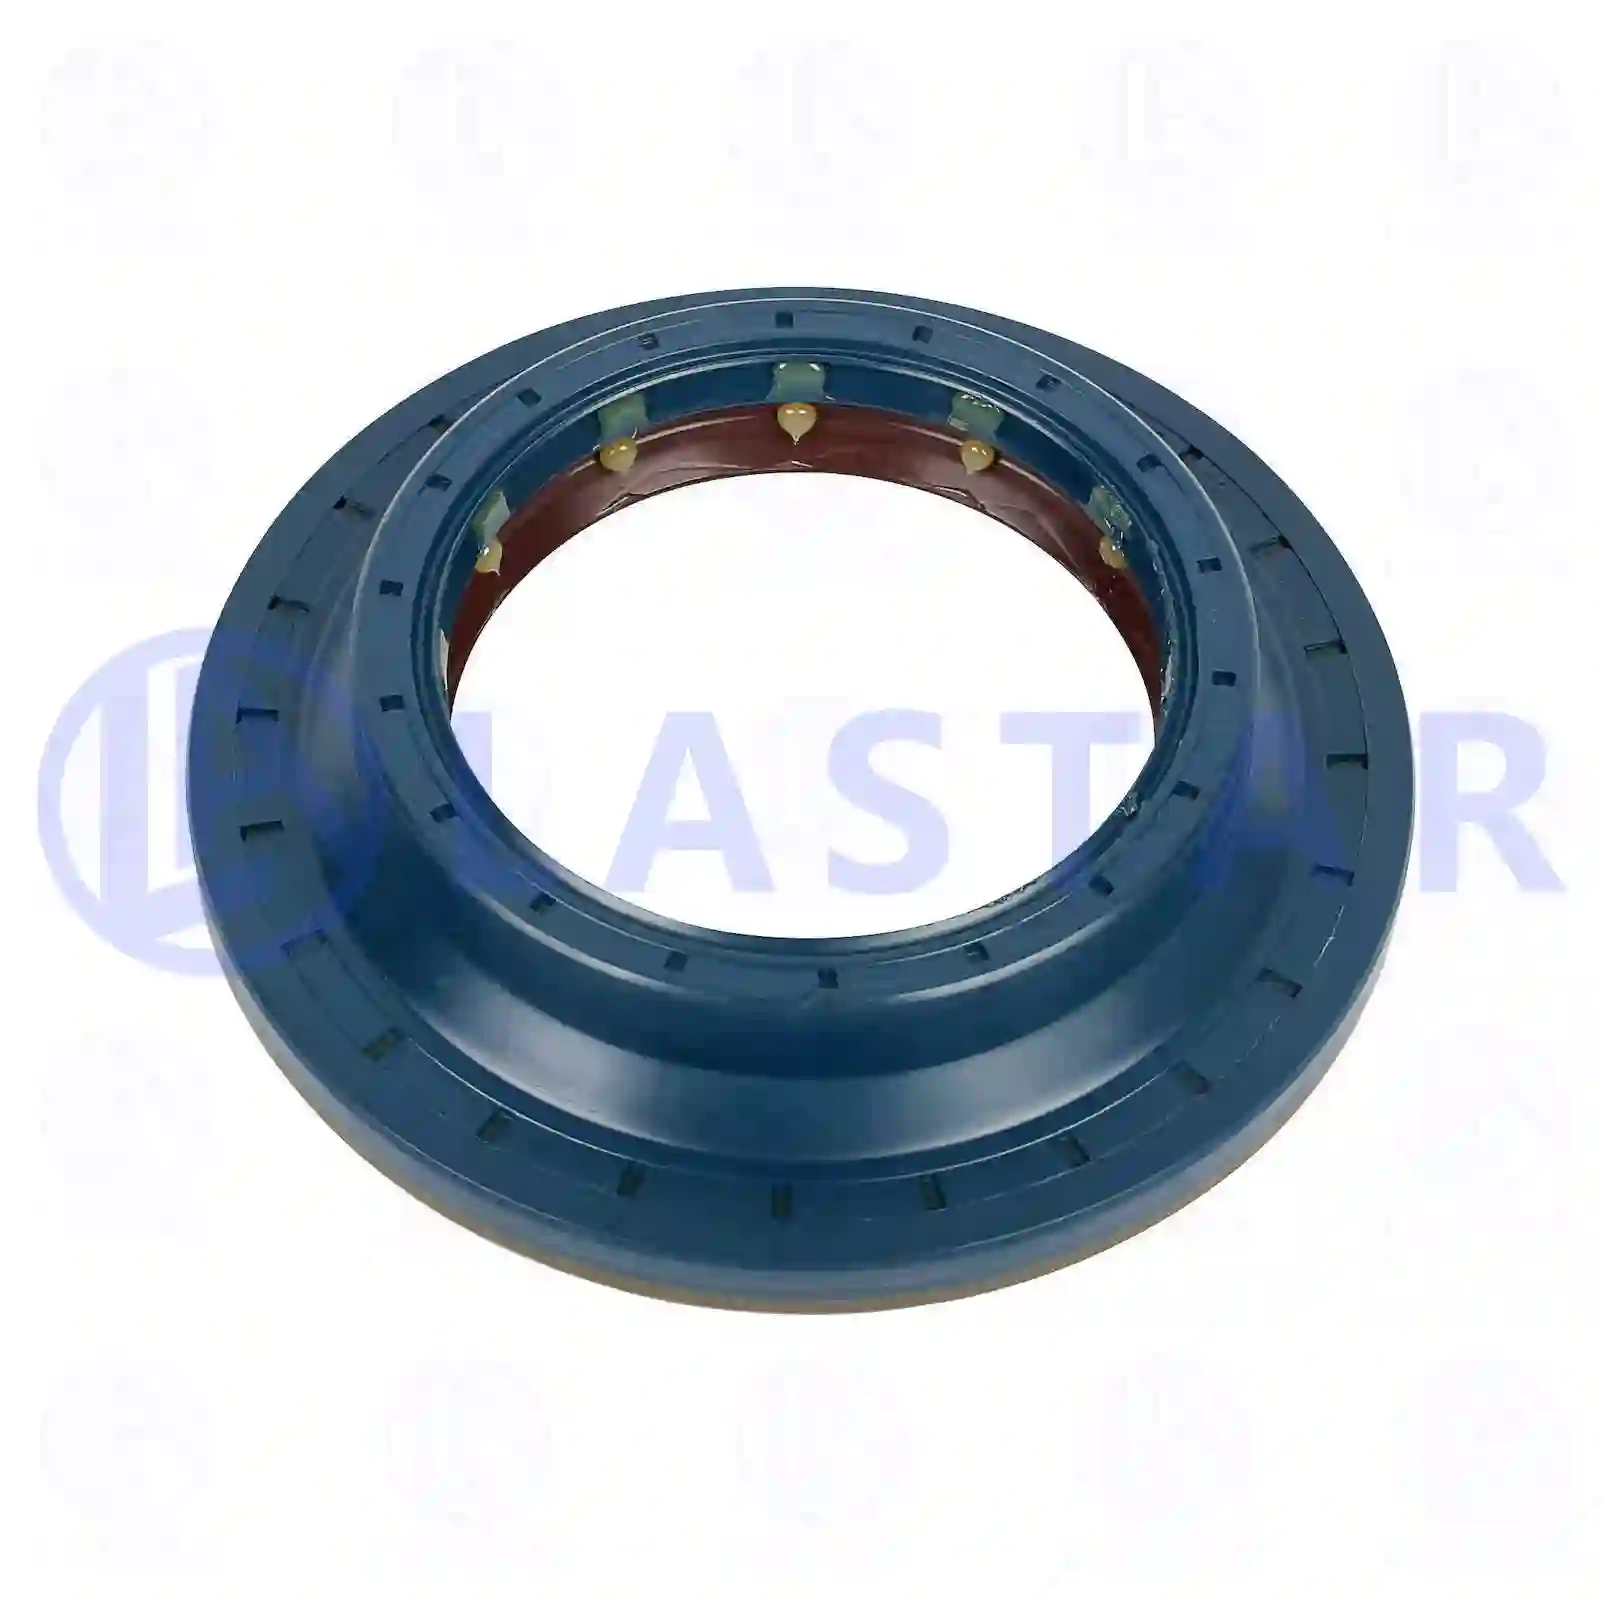 Oil seal, 77730591, 0189971847, 0189976647, , , ||  77730591 Lastar Spare Part | Truck Spare Parts, Auotomotive Spare Parts Oil seal, 77730591, 0189971847, 0189976647, , , ||  77730591 Lastar Spare Part | Truck Spare Parts, Auotomotive Spare Parts